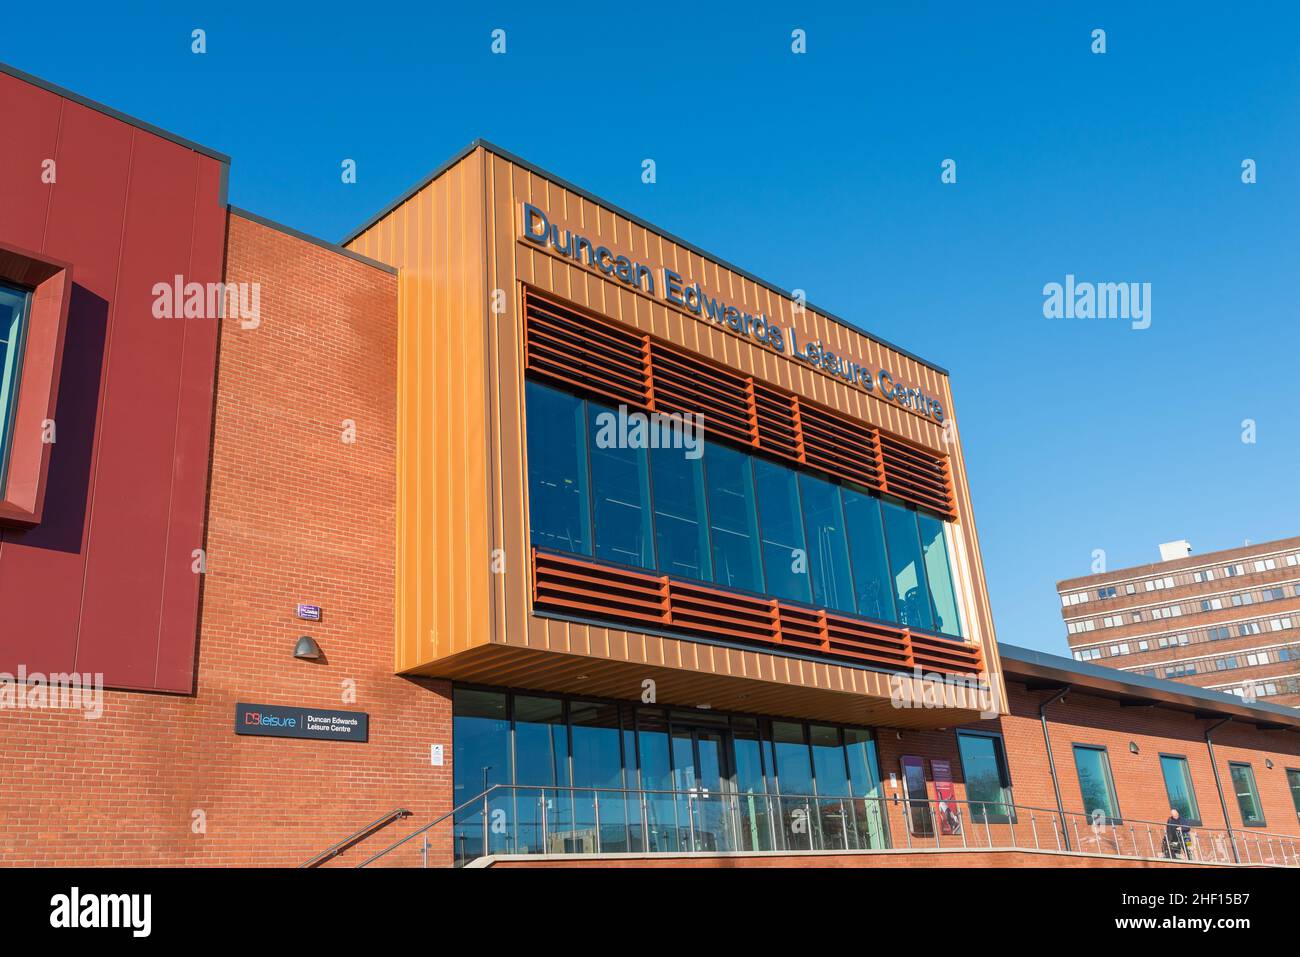 The newly built Duncan Edwards Leisure Centre in Dudley, West Midlands which opened on 24 January 2022 Stock Photo